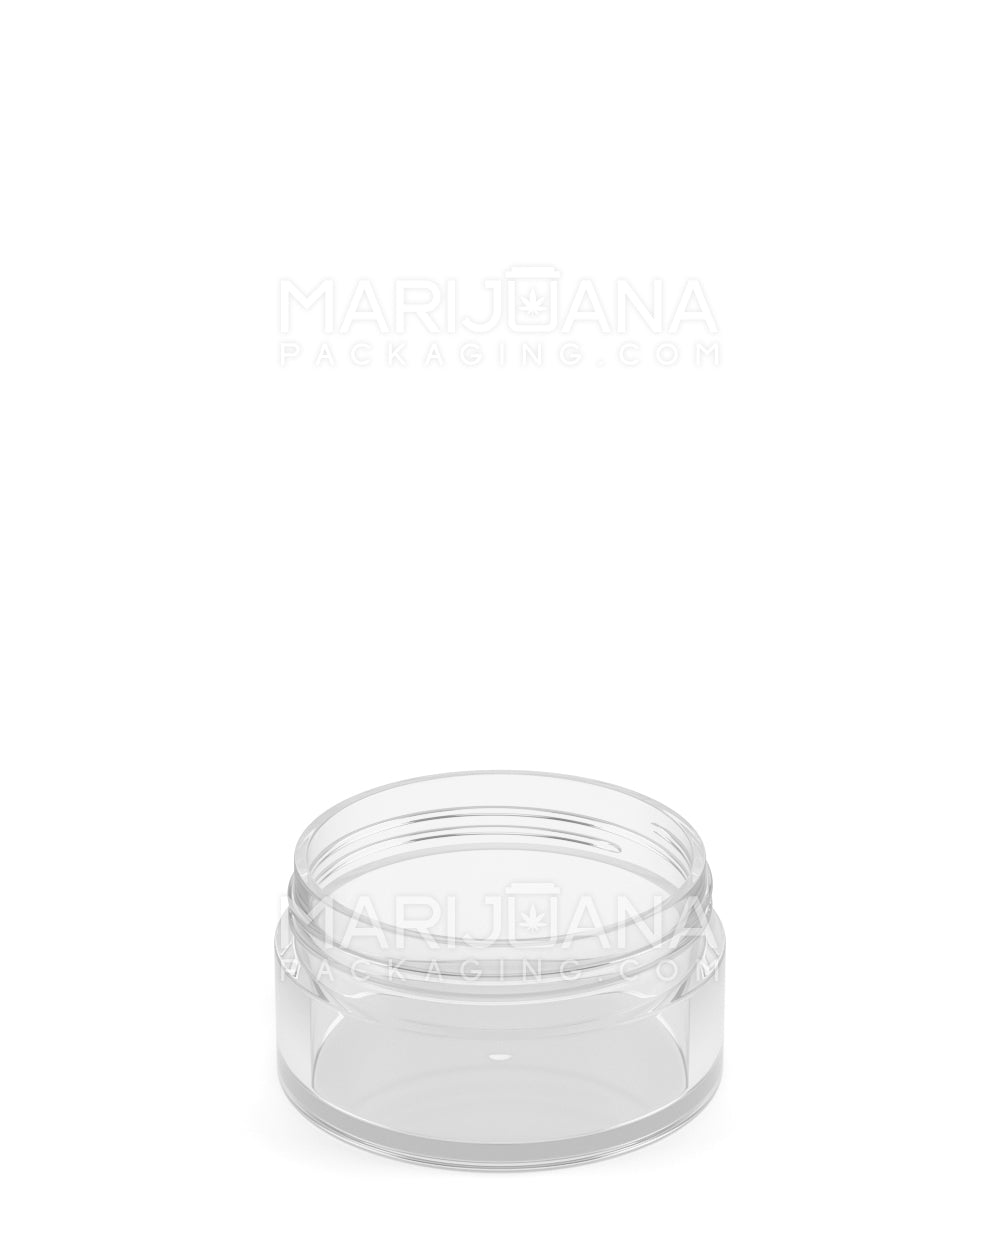 Clear Concentrate Containers w/ Screw Top Cap | 15mL - Plastic - 200 Count - 5